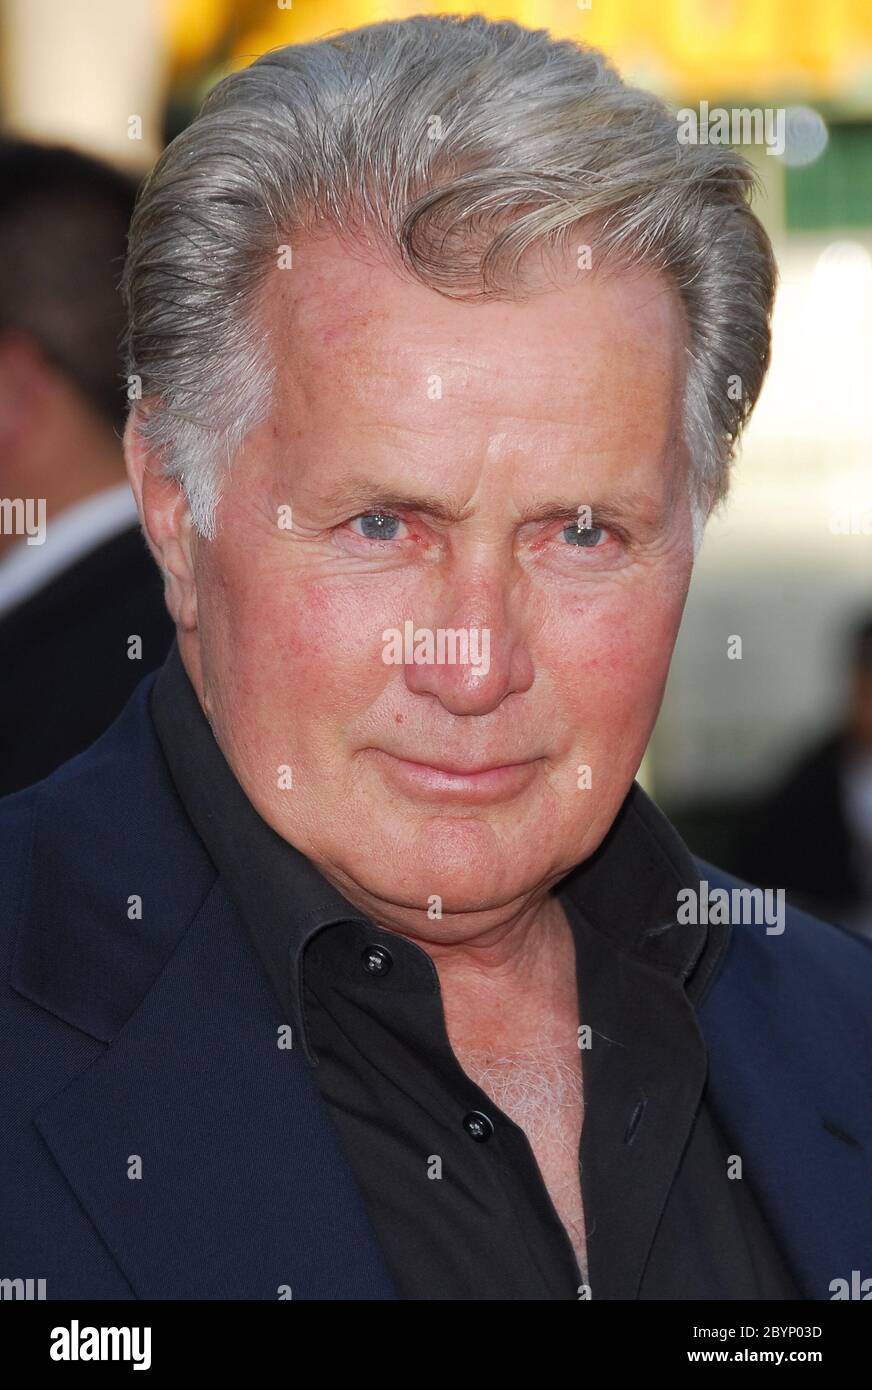 Martin Sheen at the 2007 Los Angeles Film Festival Opening Night of 'Talk To Me' held at the Mann's Village Theatre in Los Angeles, CA. The event took place on Thursday, June 21, 2007. Photo by: SBM / PictureLux - File Reference # 34006-6505SBMPLX Stock Photo